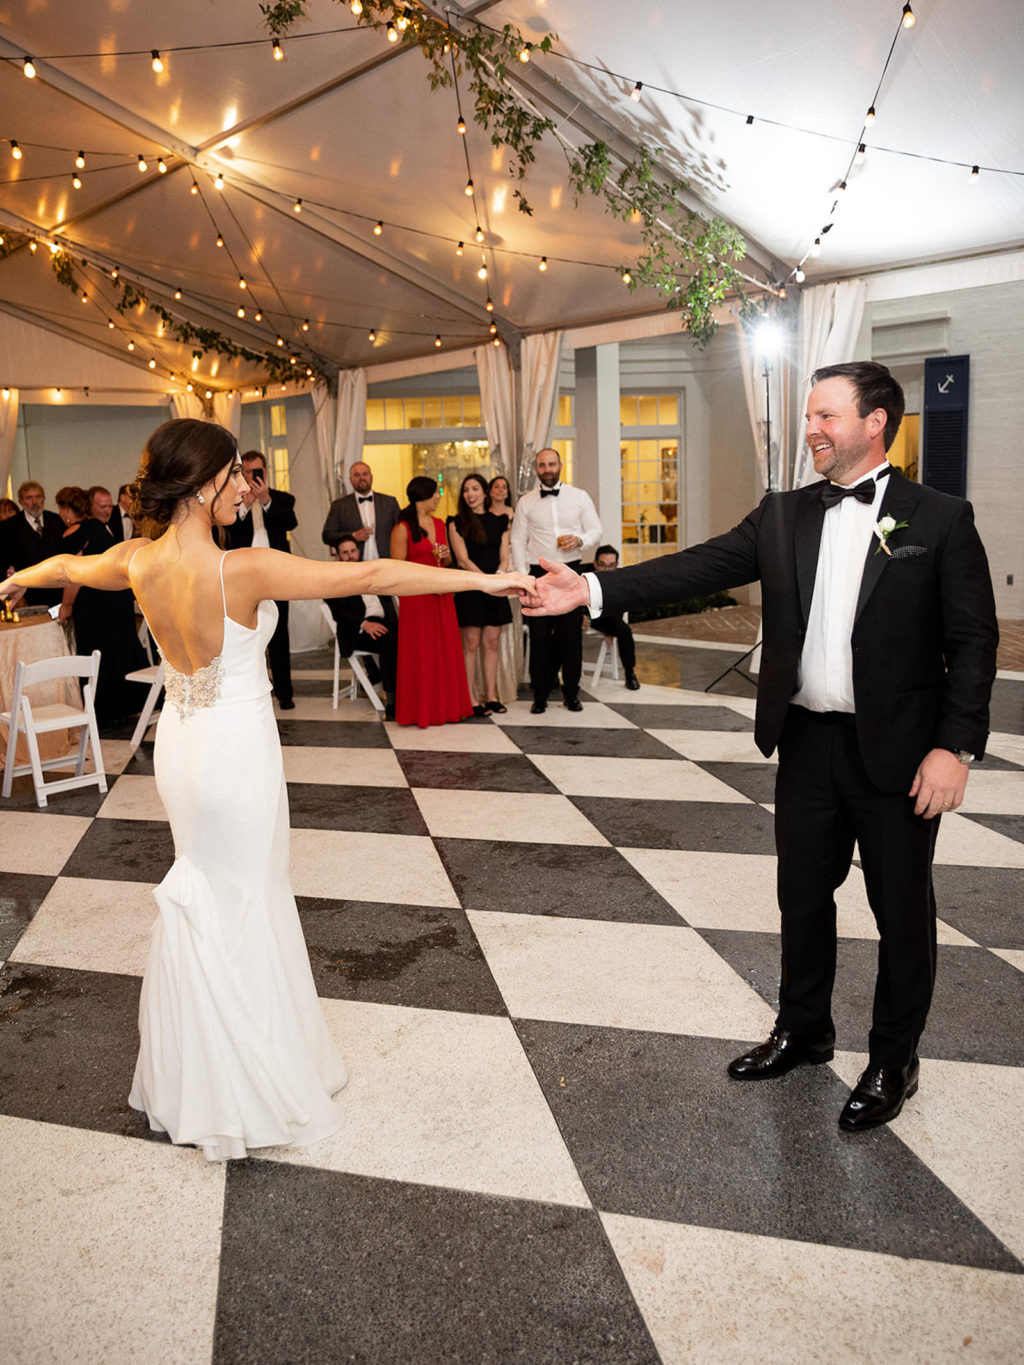 Classic Bride and Groom First Dance Wedding Reception Photo, String Lights, Black and White Checkered Dance Floor | Tampa Bay Wedding Rentals Kate Ryan Event Rentals